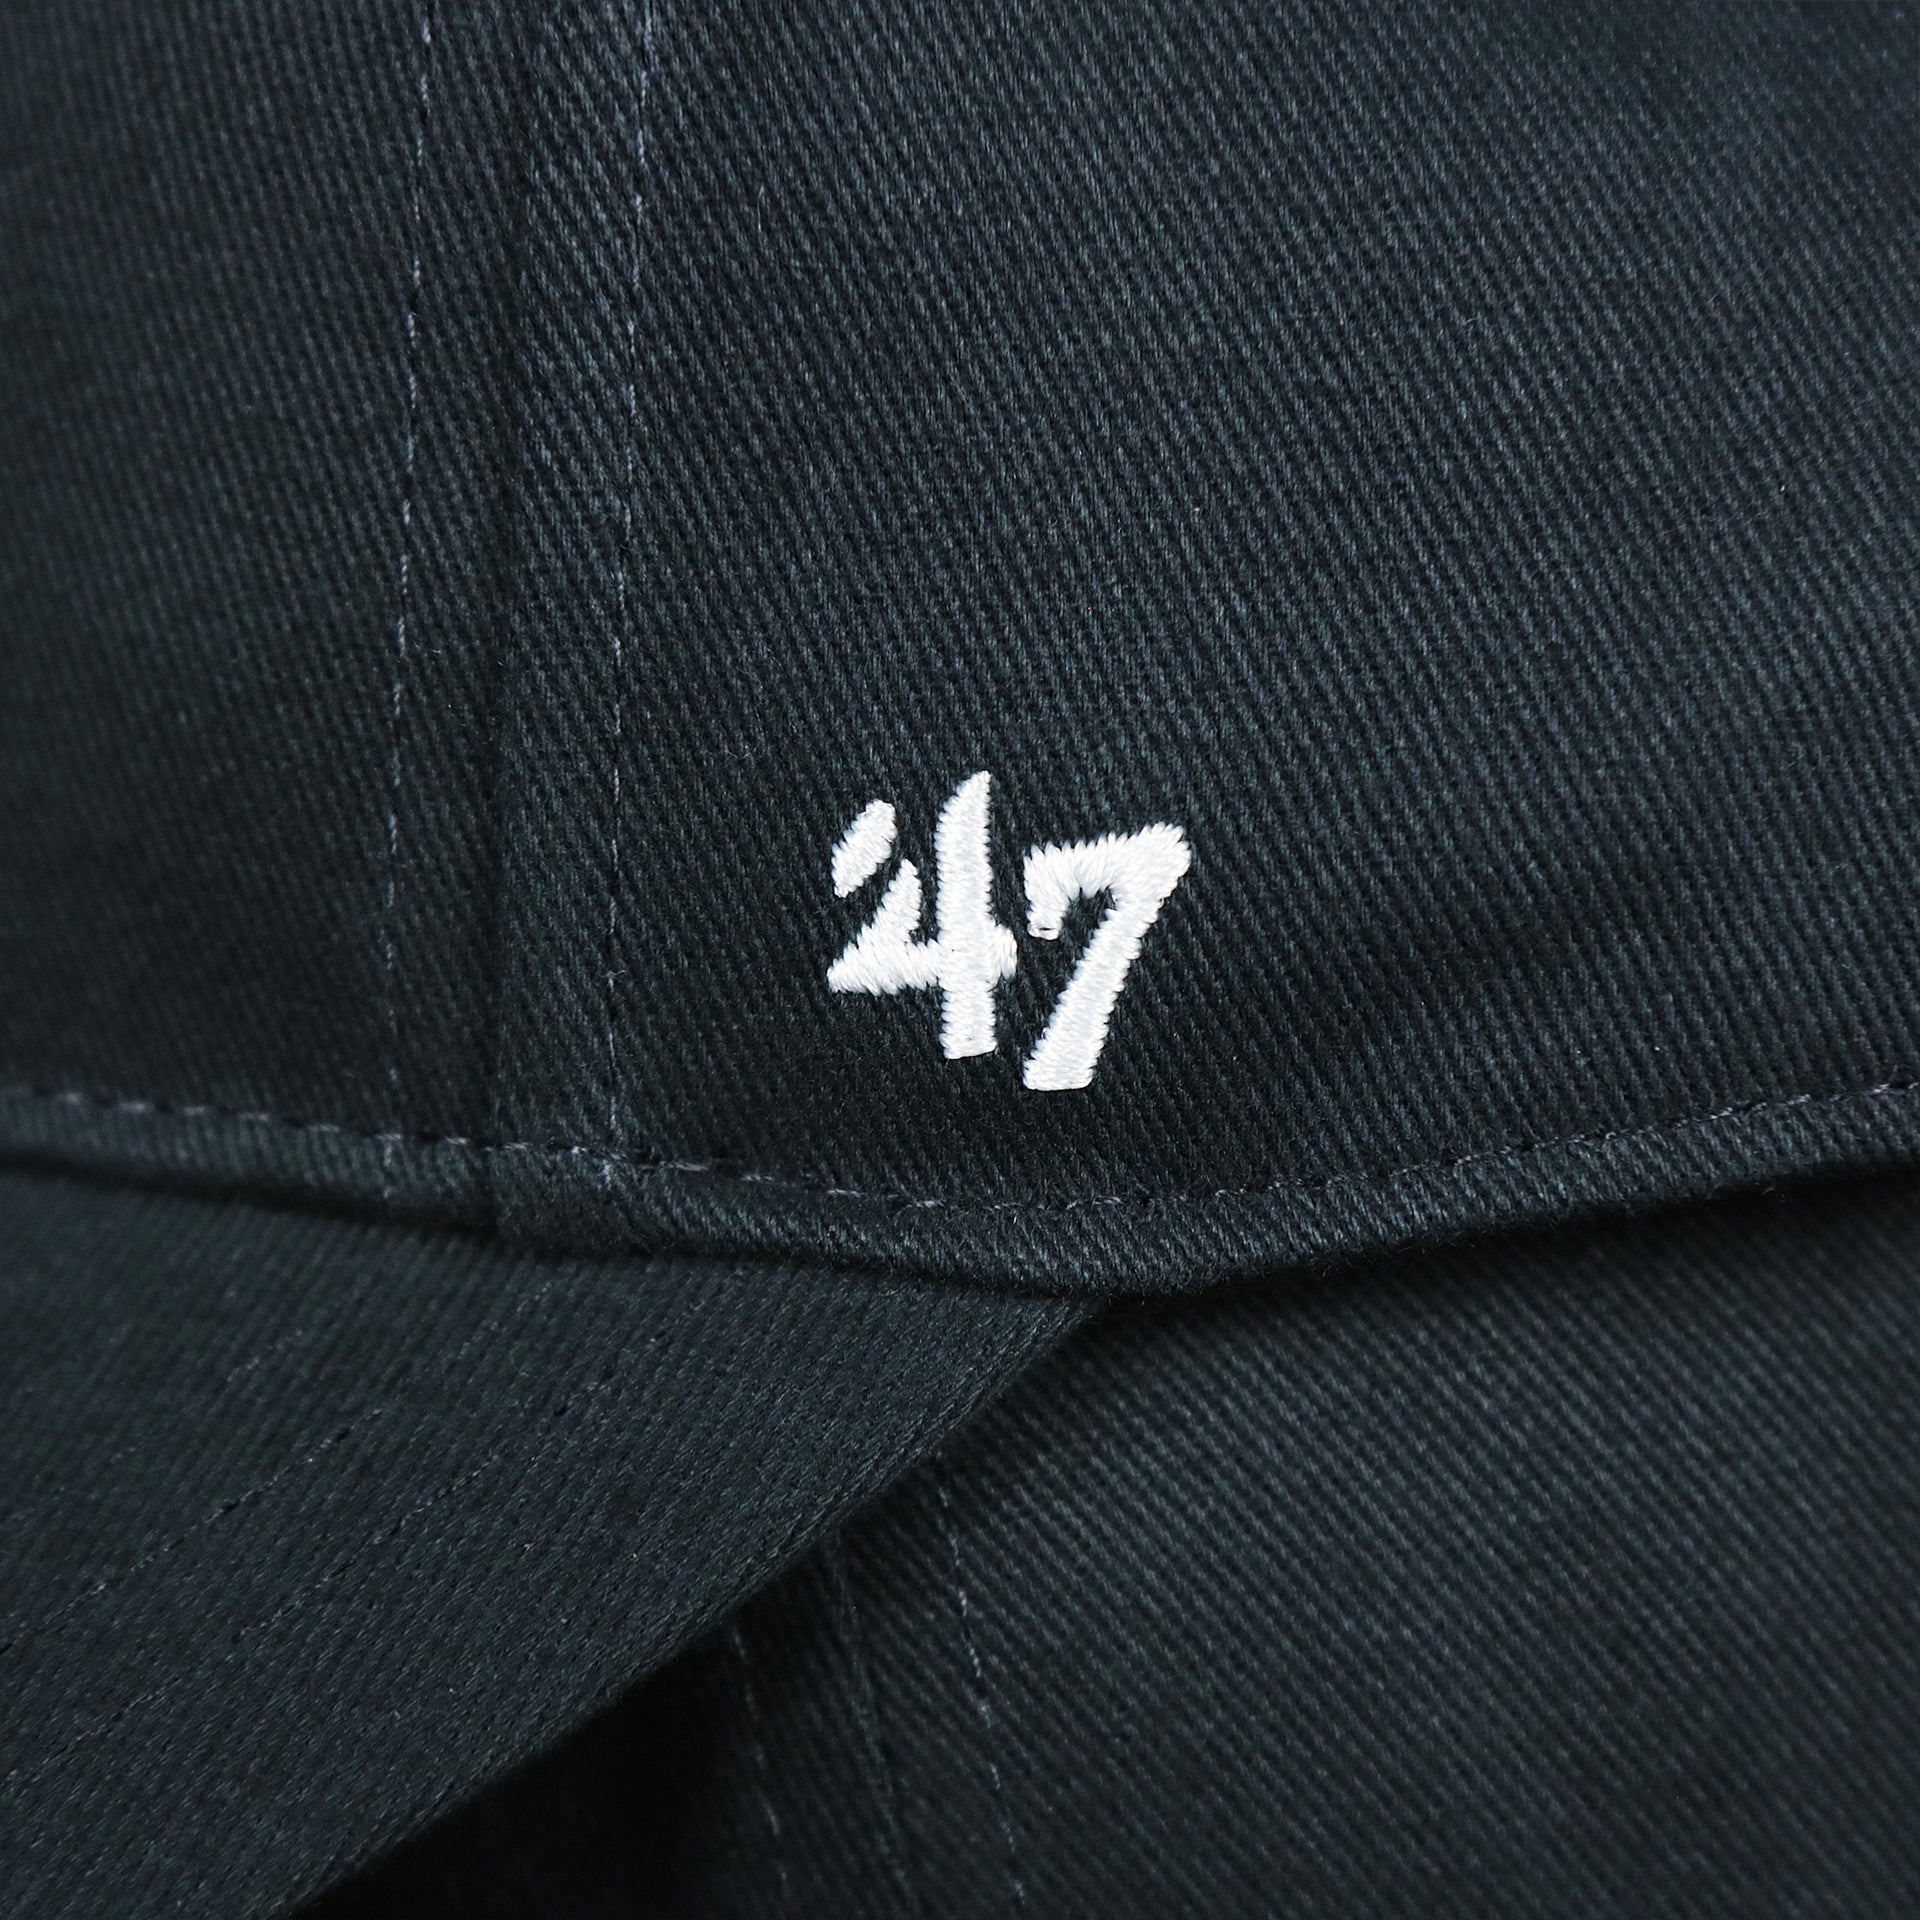 The 47 Brand Logo on the Toddler New York Yankees Gray Bottom Dad Hat | Navy Toddler Dad Hat